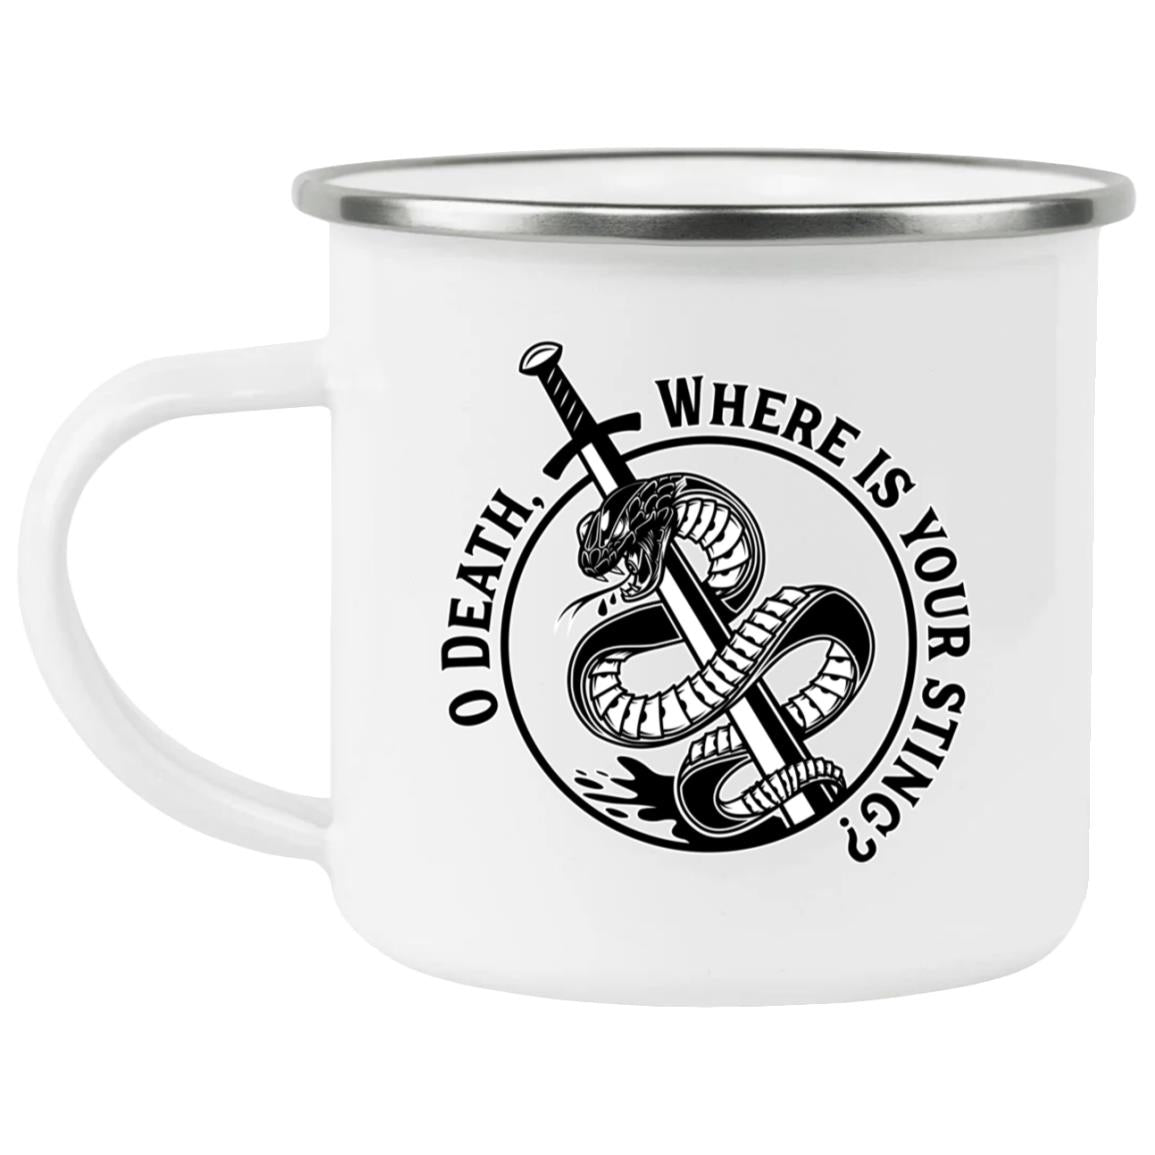 Where is Your Sting 21271 Enamel Camping Mug